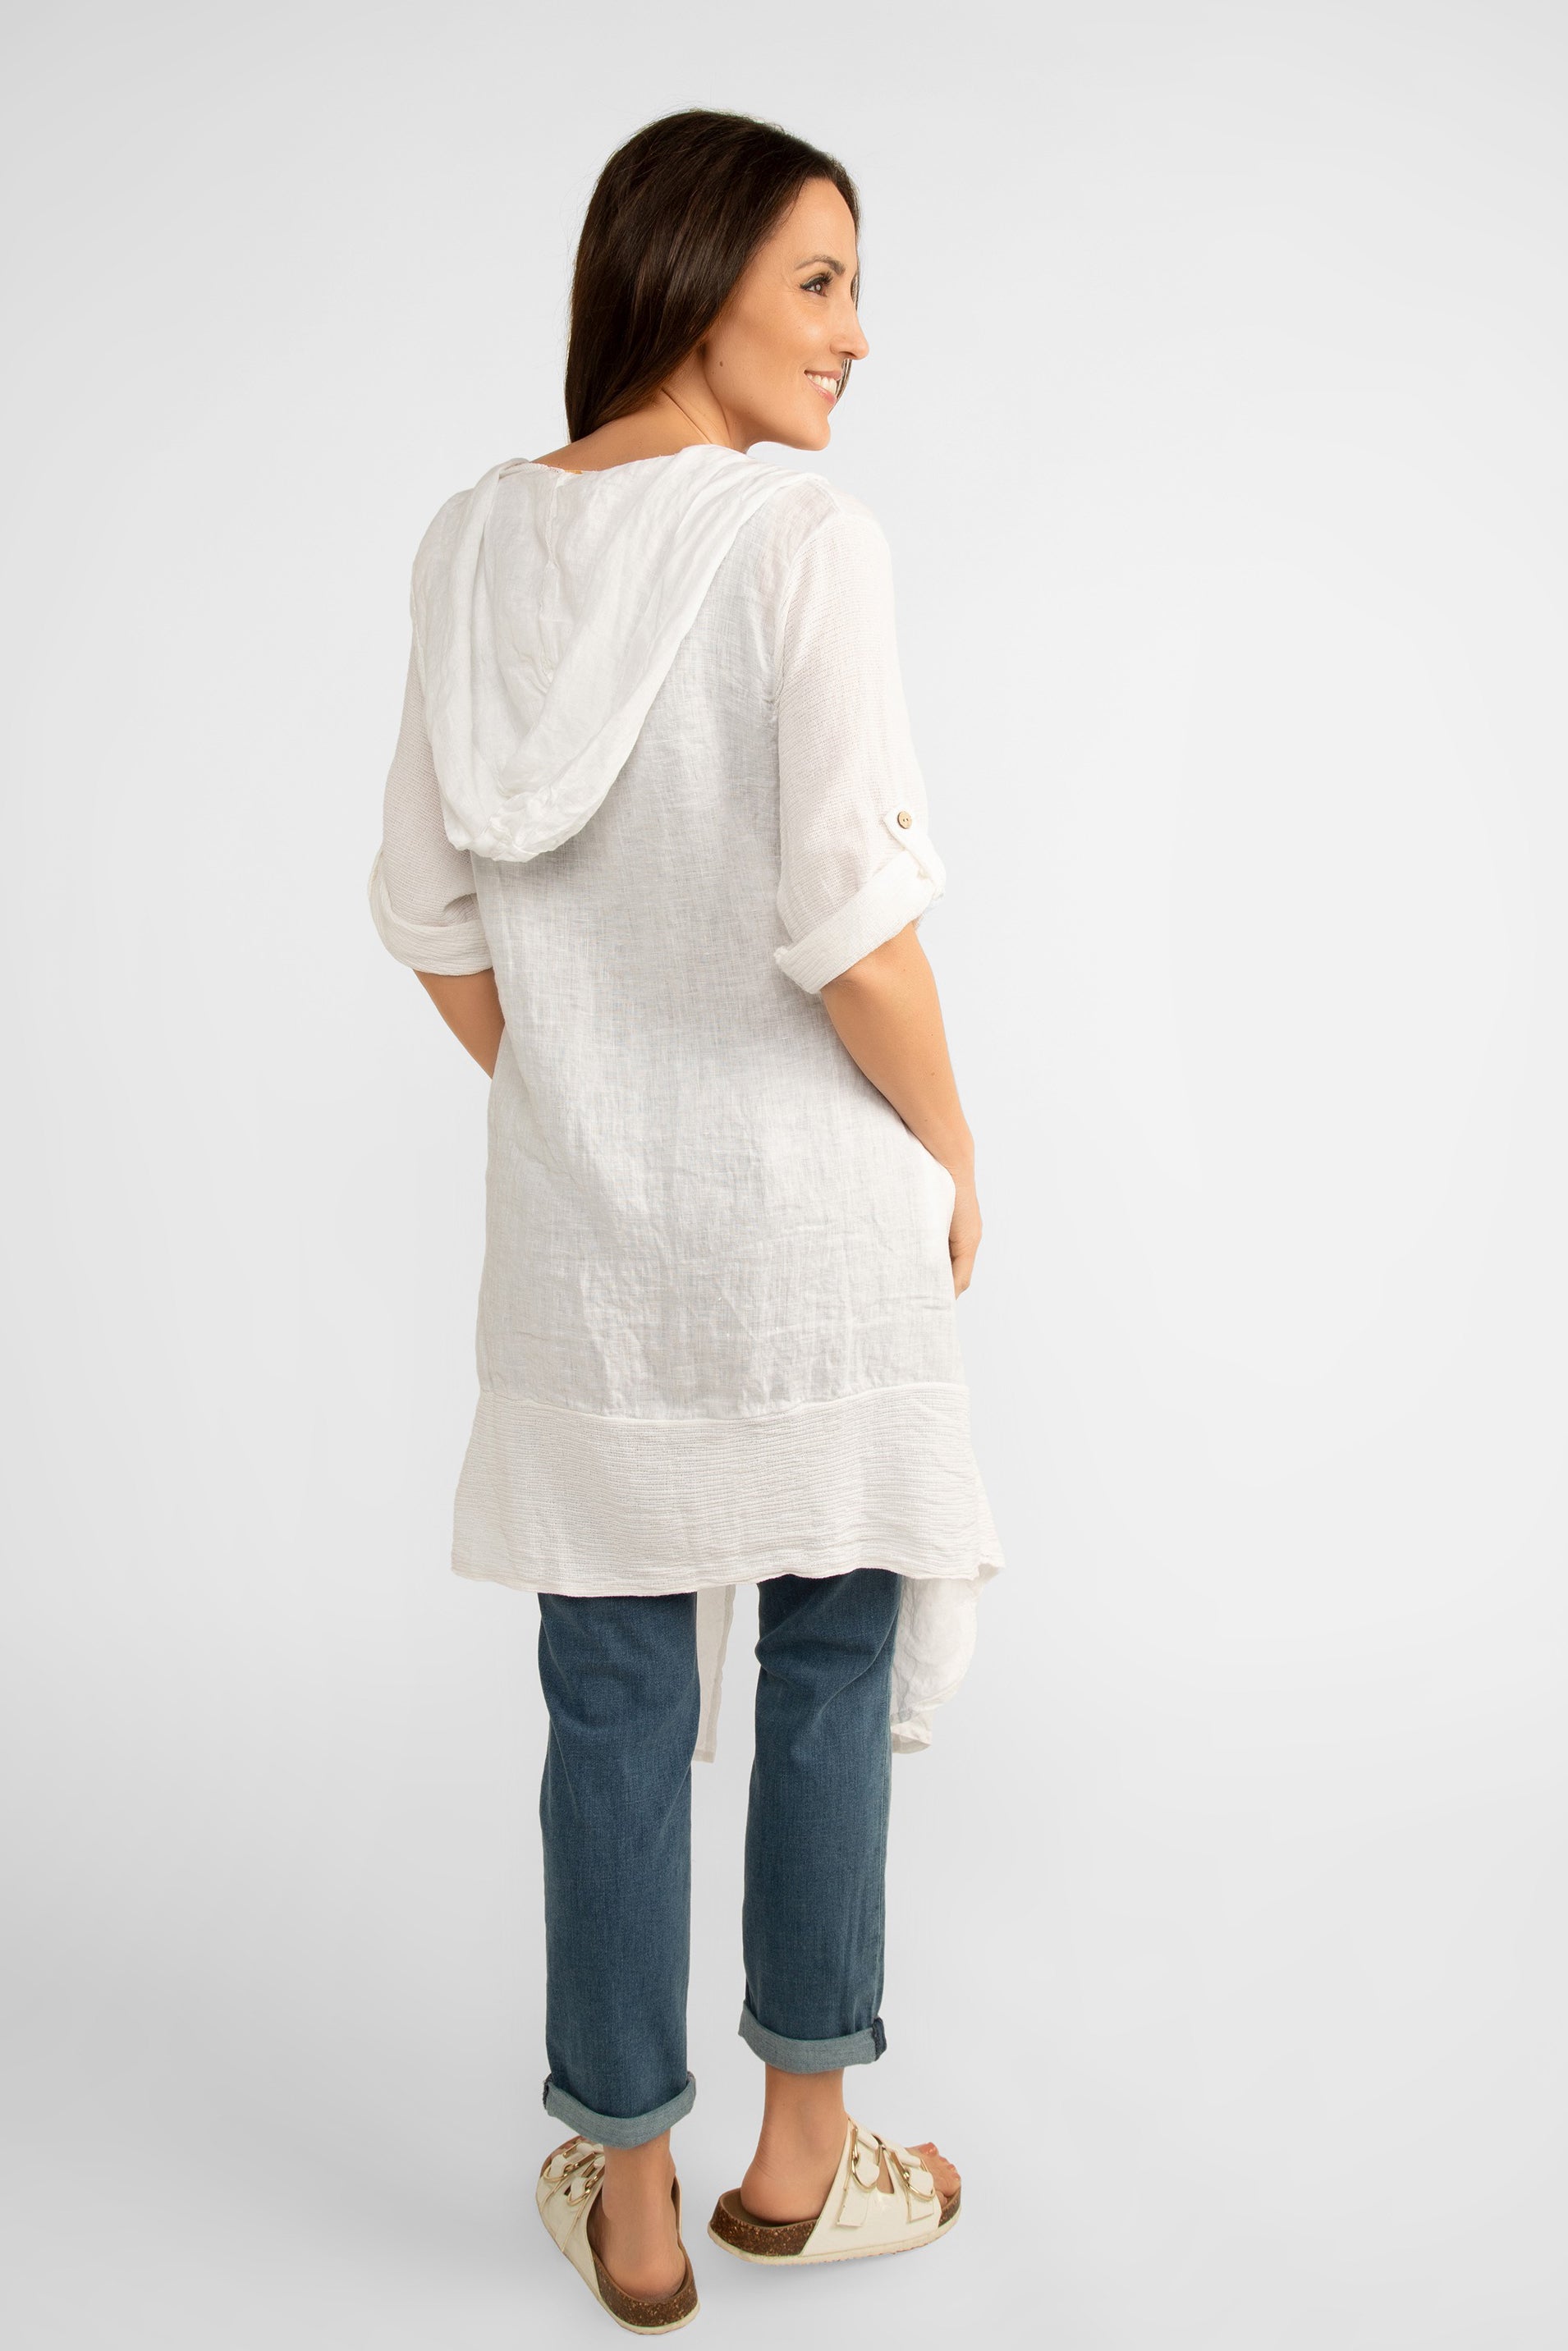 Back view of Me & Gee Women's Hooded Summer Cover-Up With Short Roll Tab Sleeves in White